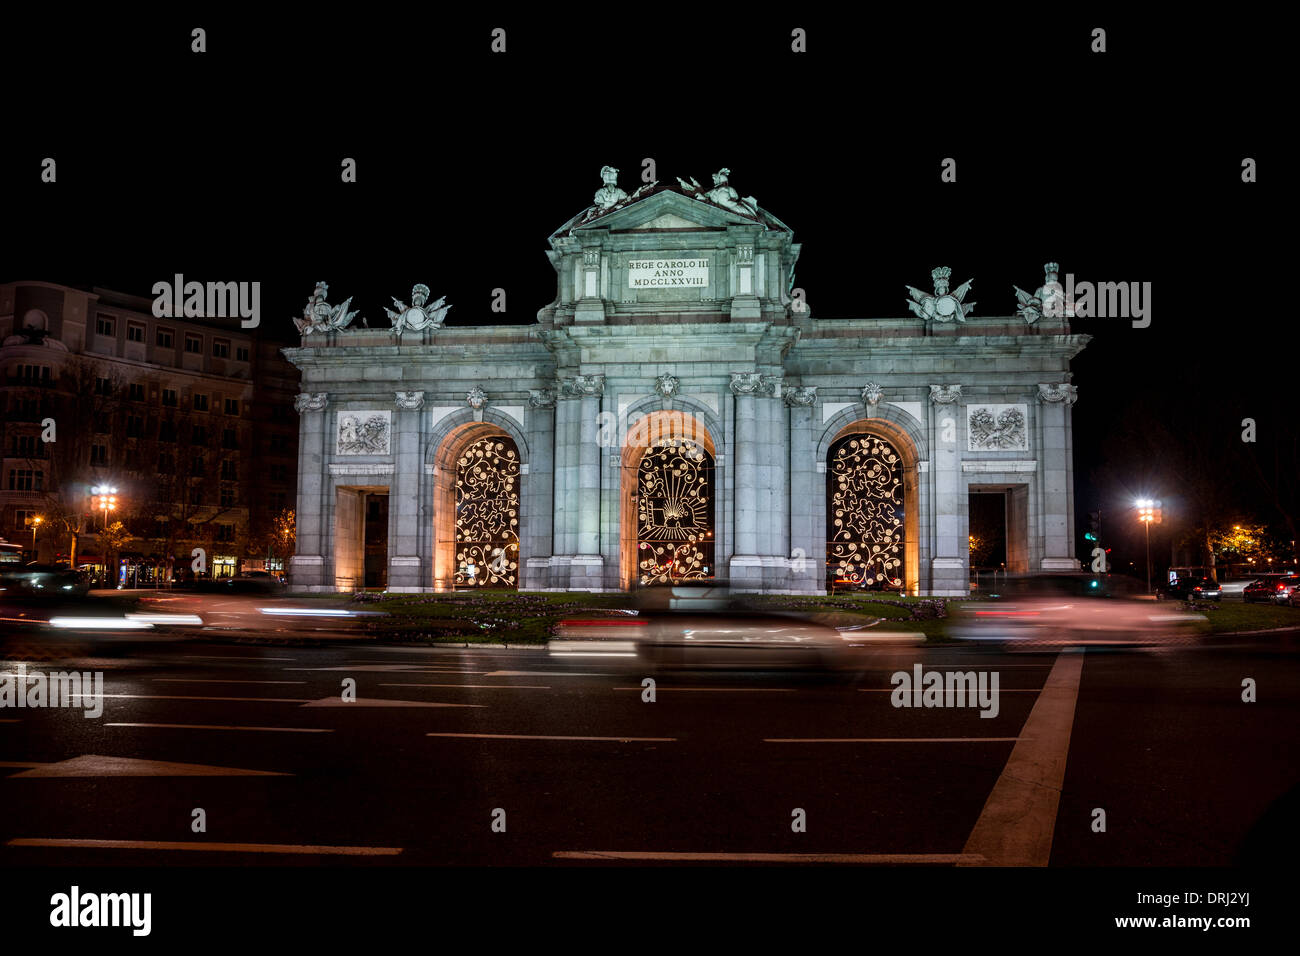 Night view of Puerta de Alcalá (Madrid) with Christmas decorations Stock Photo